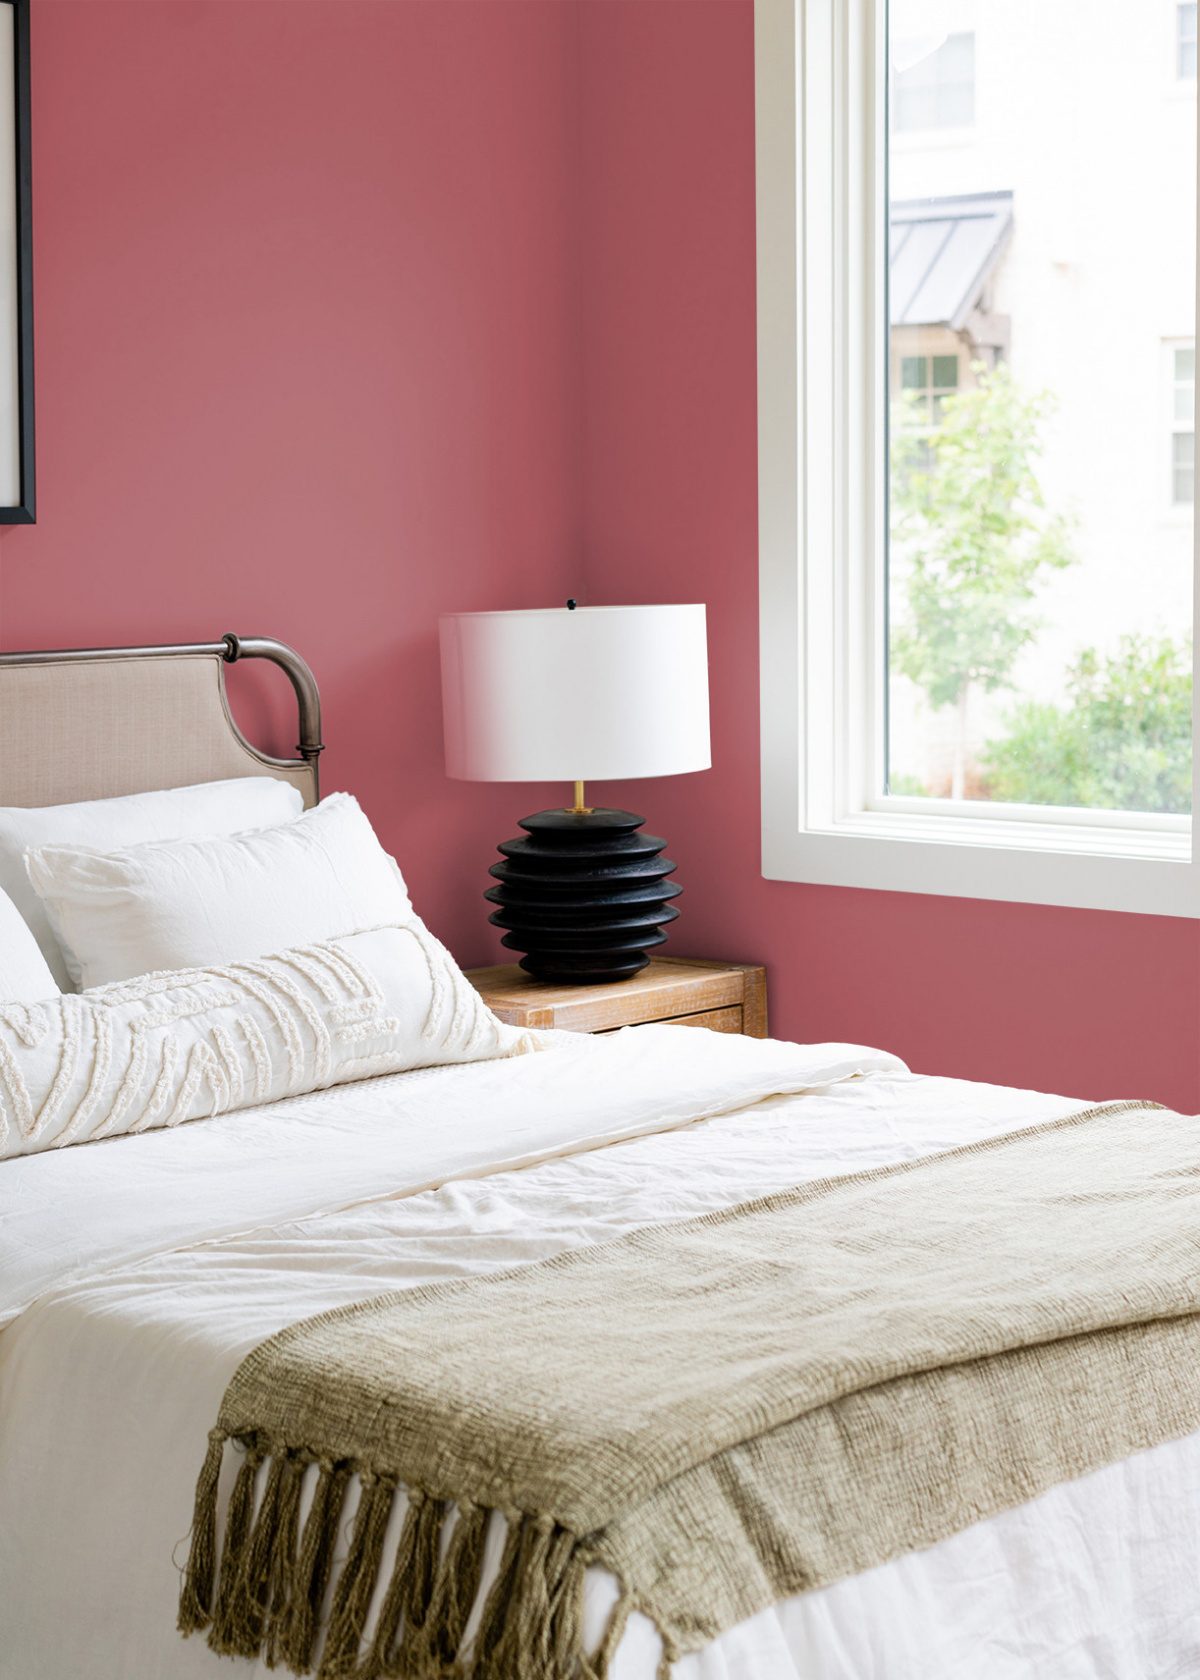 Bedroom Wall Painted in Terra Rosa (a rosy hue)